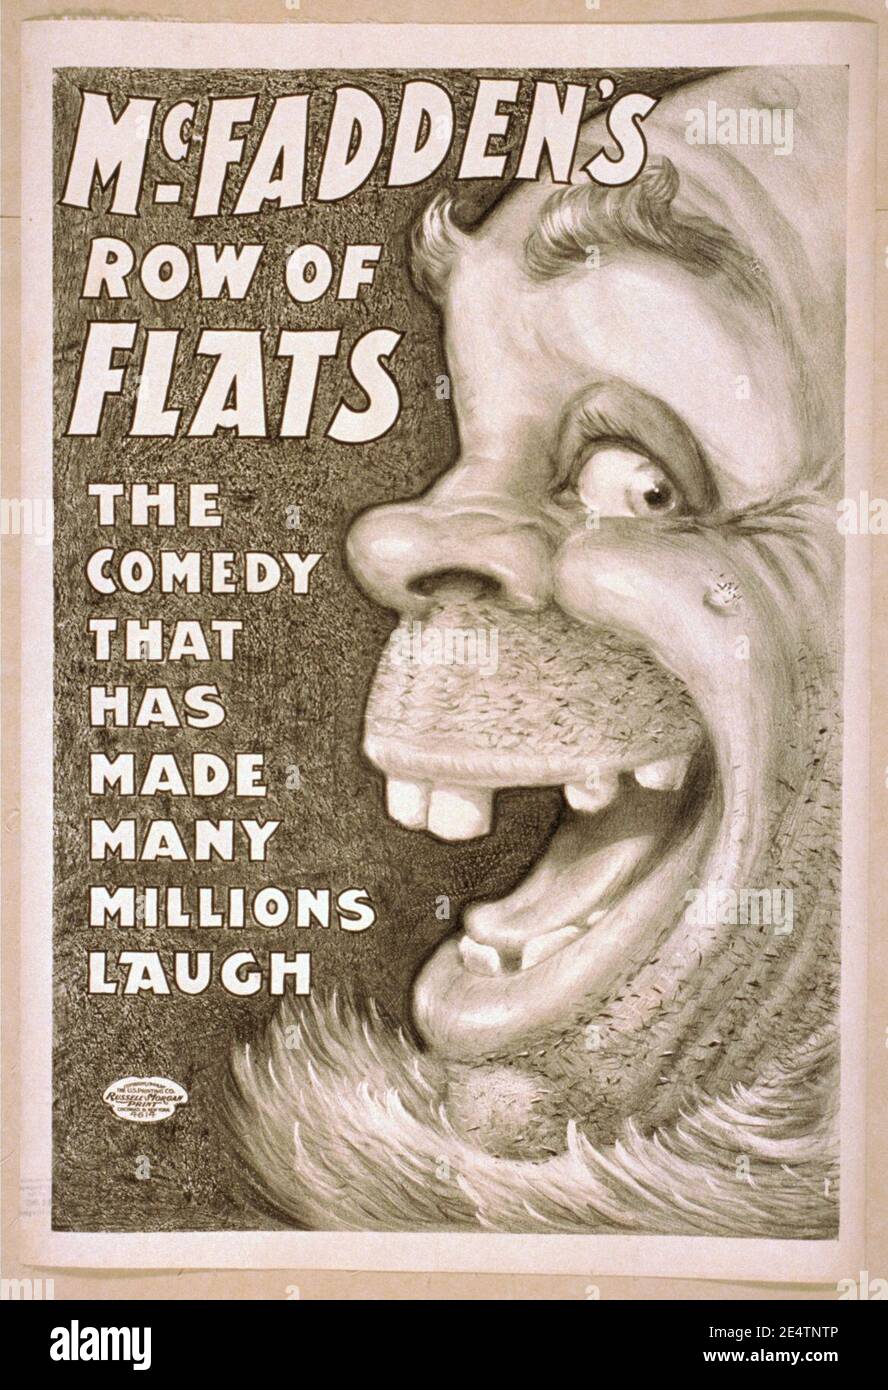 McFadden's row of flats the comedy that has made many millions laugh. Stock Photo